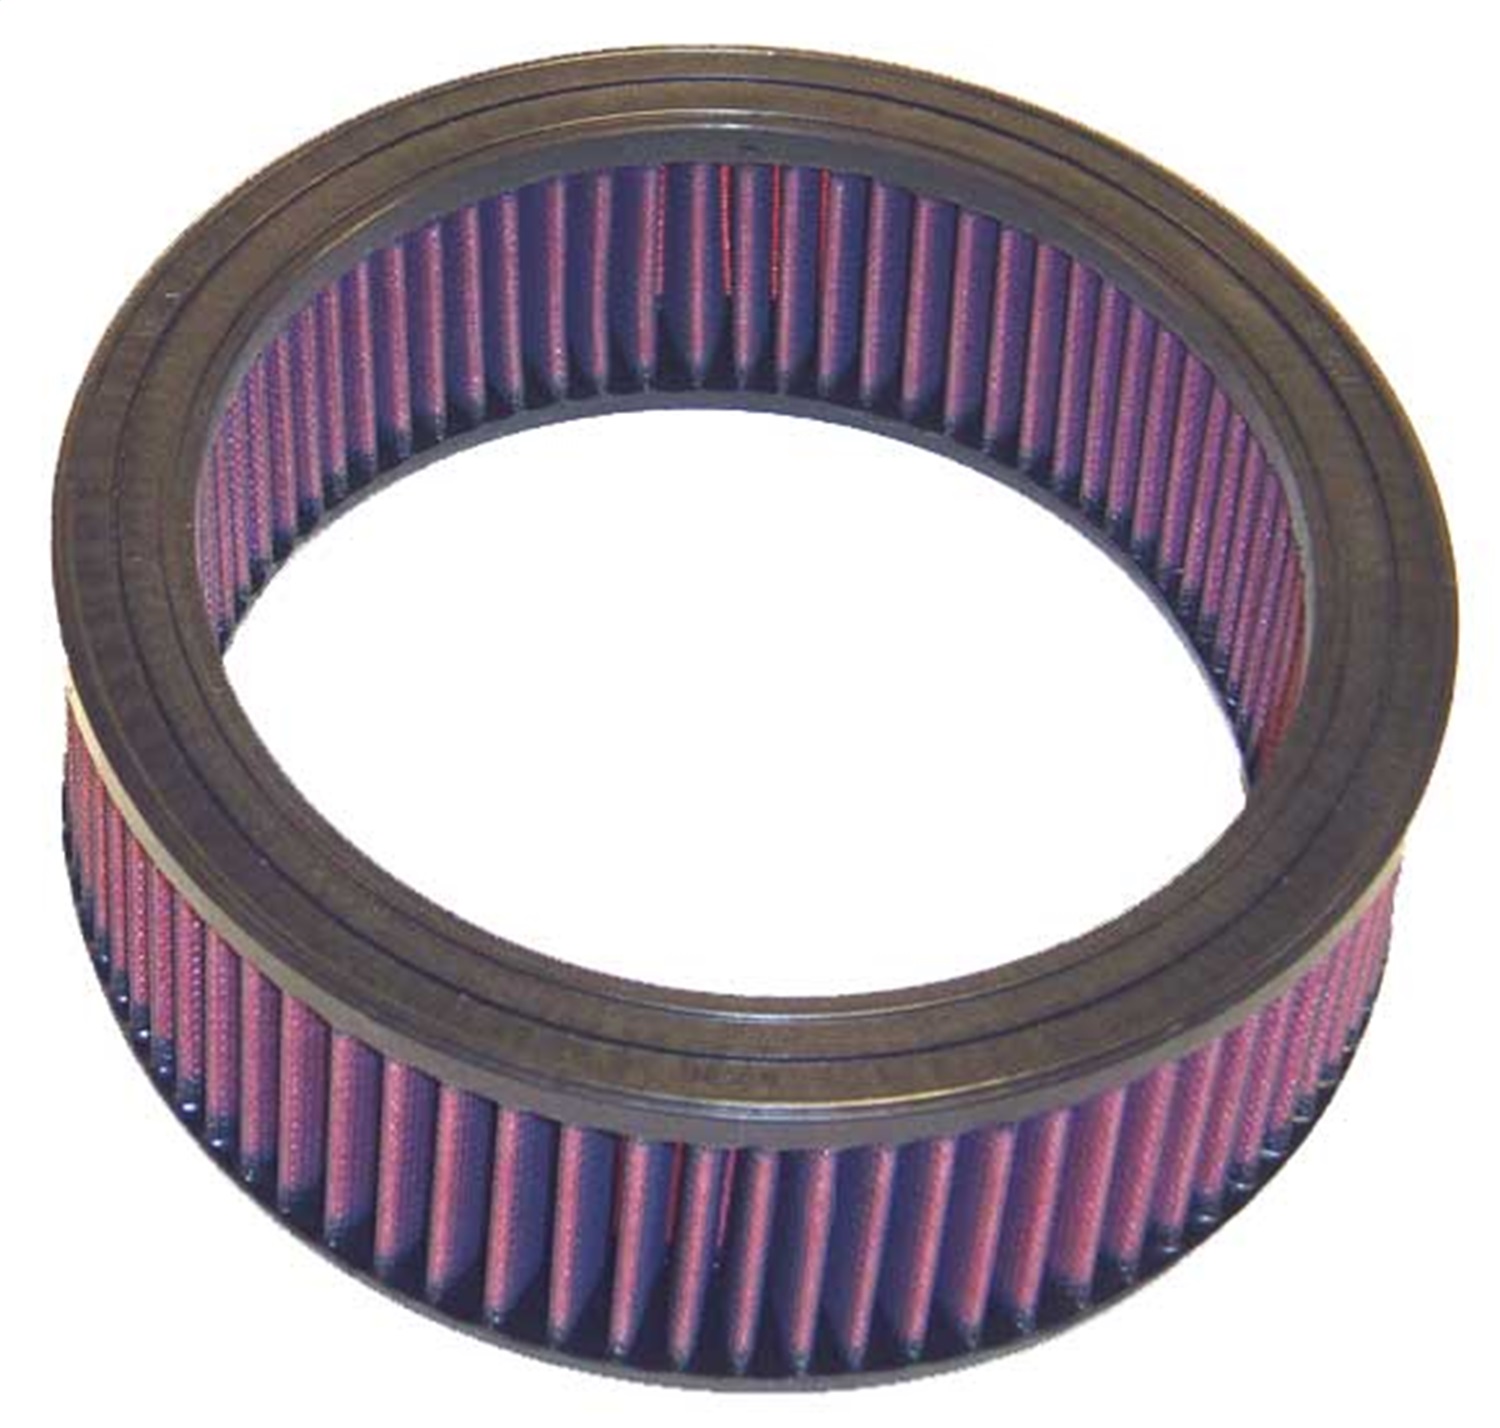 K&N Filters K&N Filters E-2700 Air Filter Fits 75-85 808 Cosmo RX-3 RX-4 RX-7